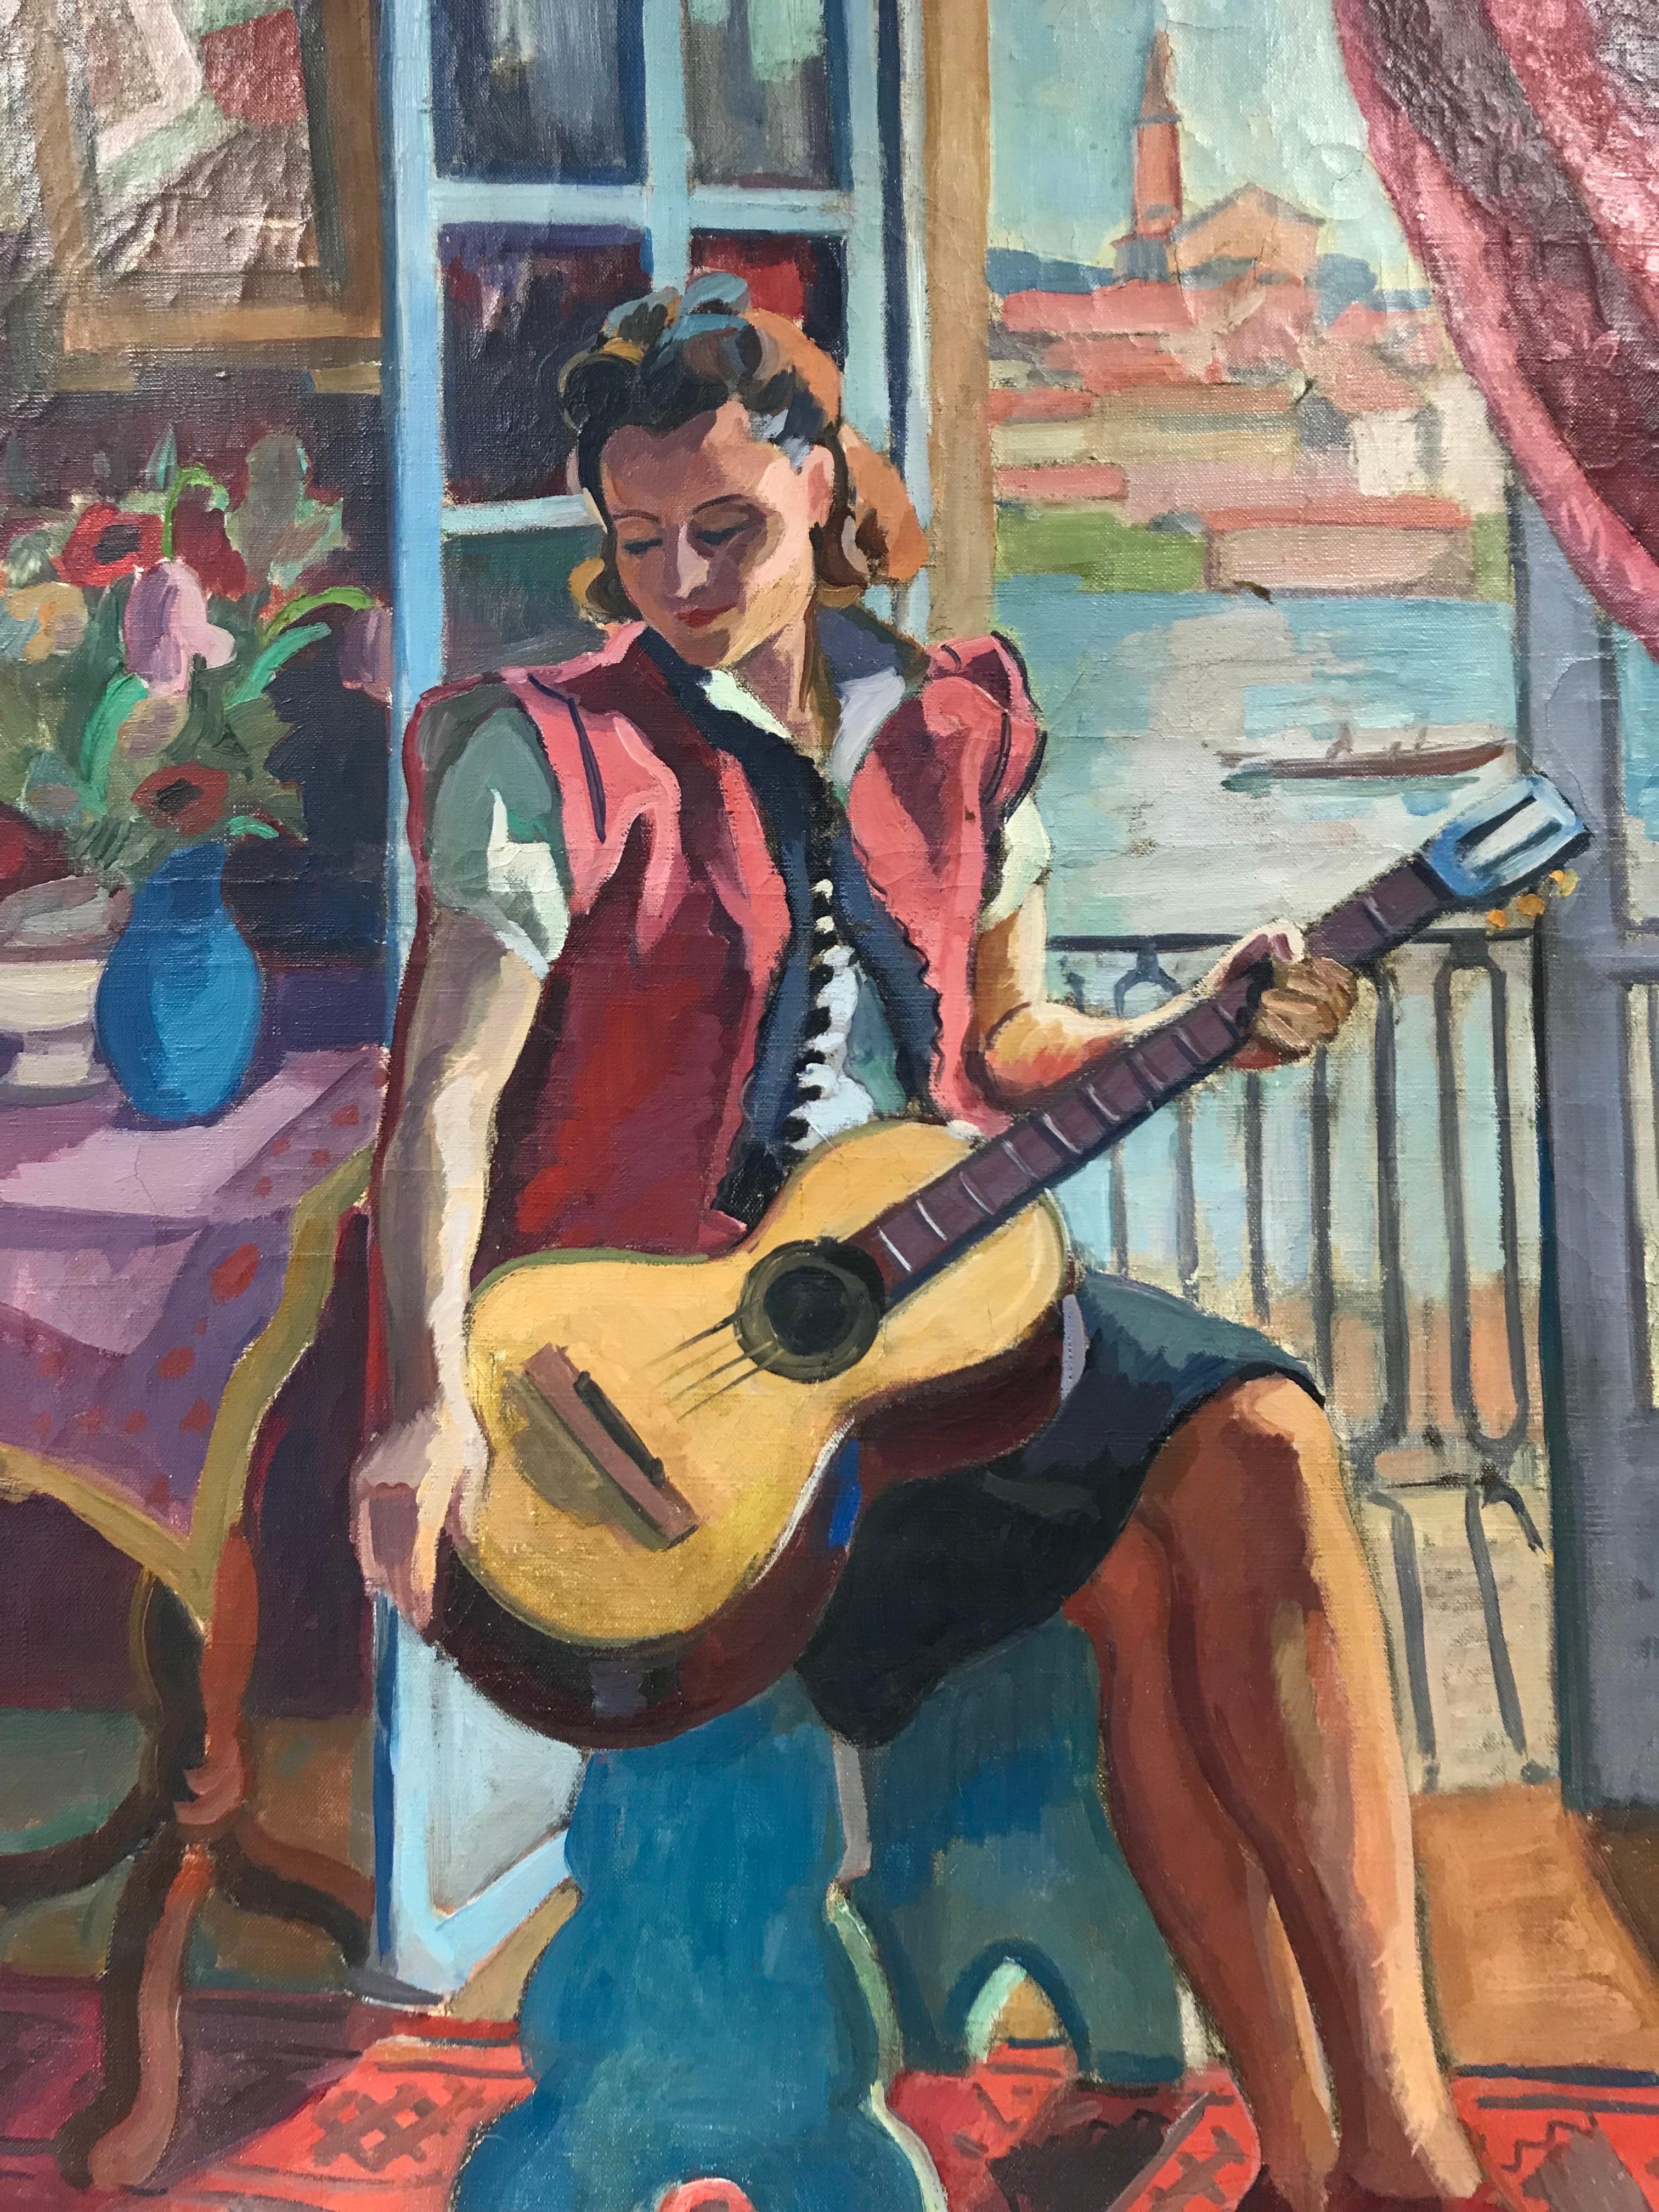 Artist/ School: Roger Worms, French mid 20th century, signed lower corner

Title: Lady with Guitar seated in Window overlooking Marseille Harbour

Medium:  oil painting on canvas, unframed

canvas:   28.75 x 23.5 inches

Provenance: private